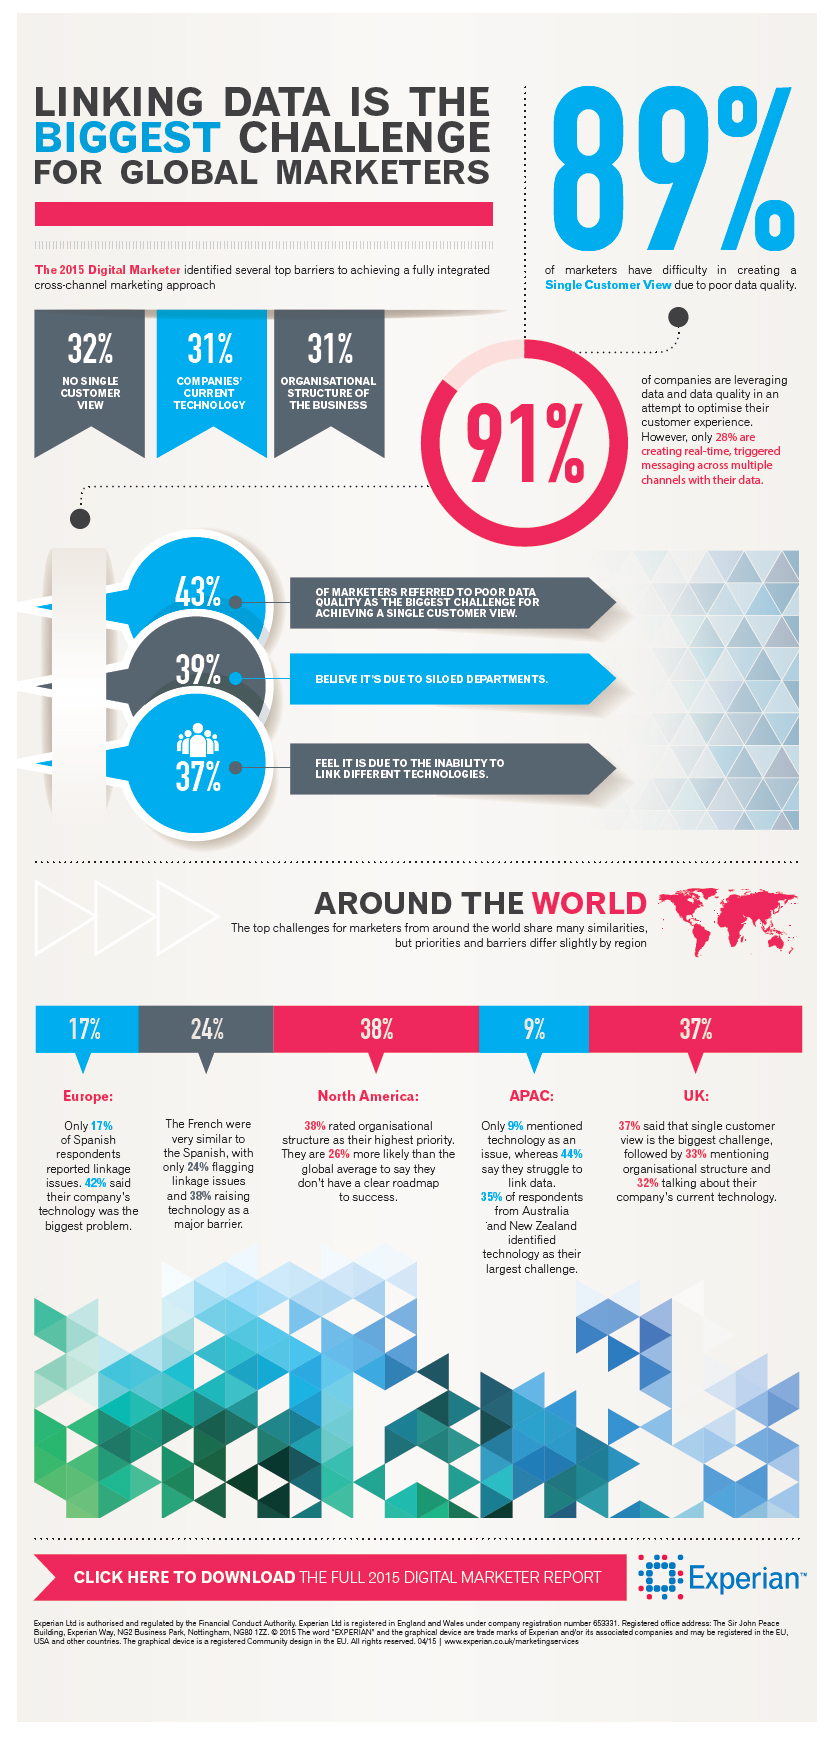 Linking Data is the Biggest Challenge for Global Marketers [Infographic]